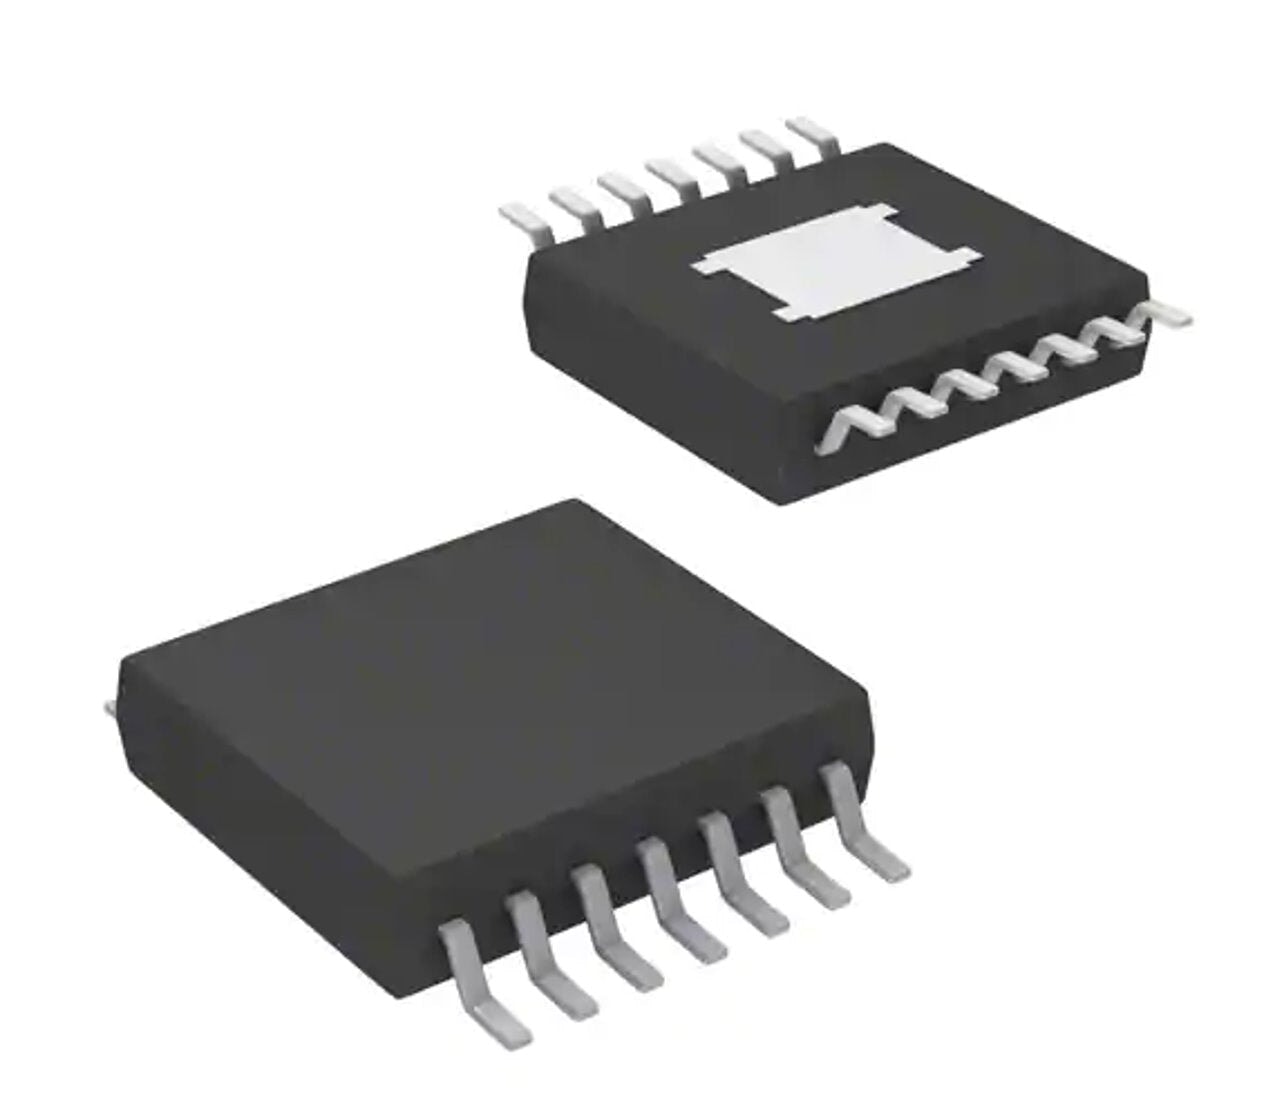 Infineon Technologies Touch Screen Controllers Part #CY7C53150-20AXIT | Controller | DEX Information Technology Infineon Technologies 